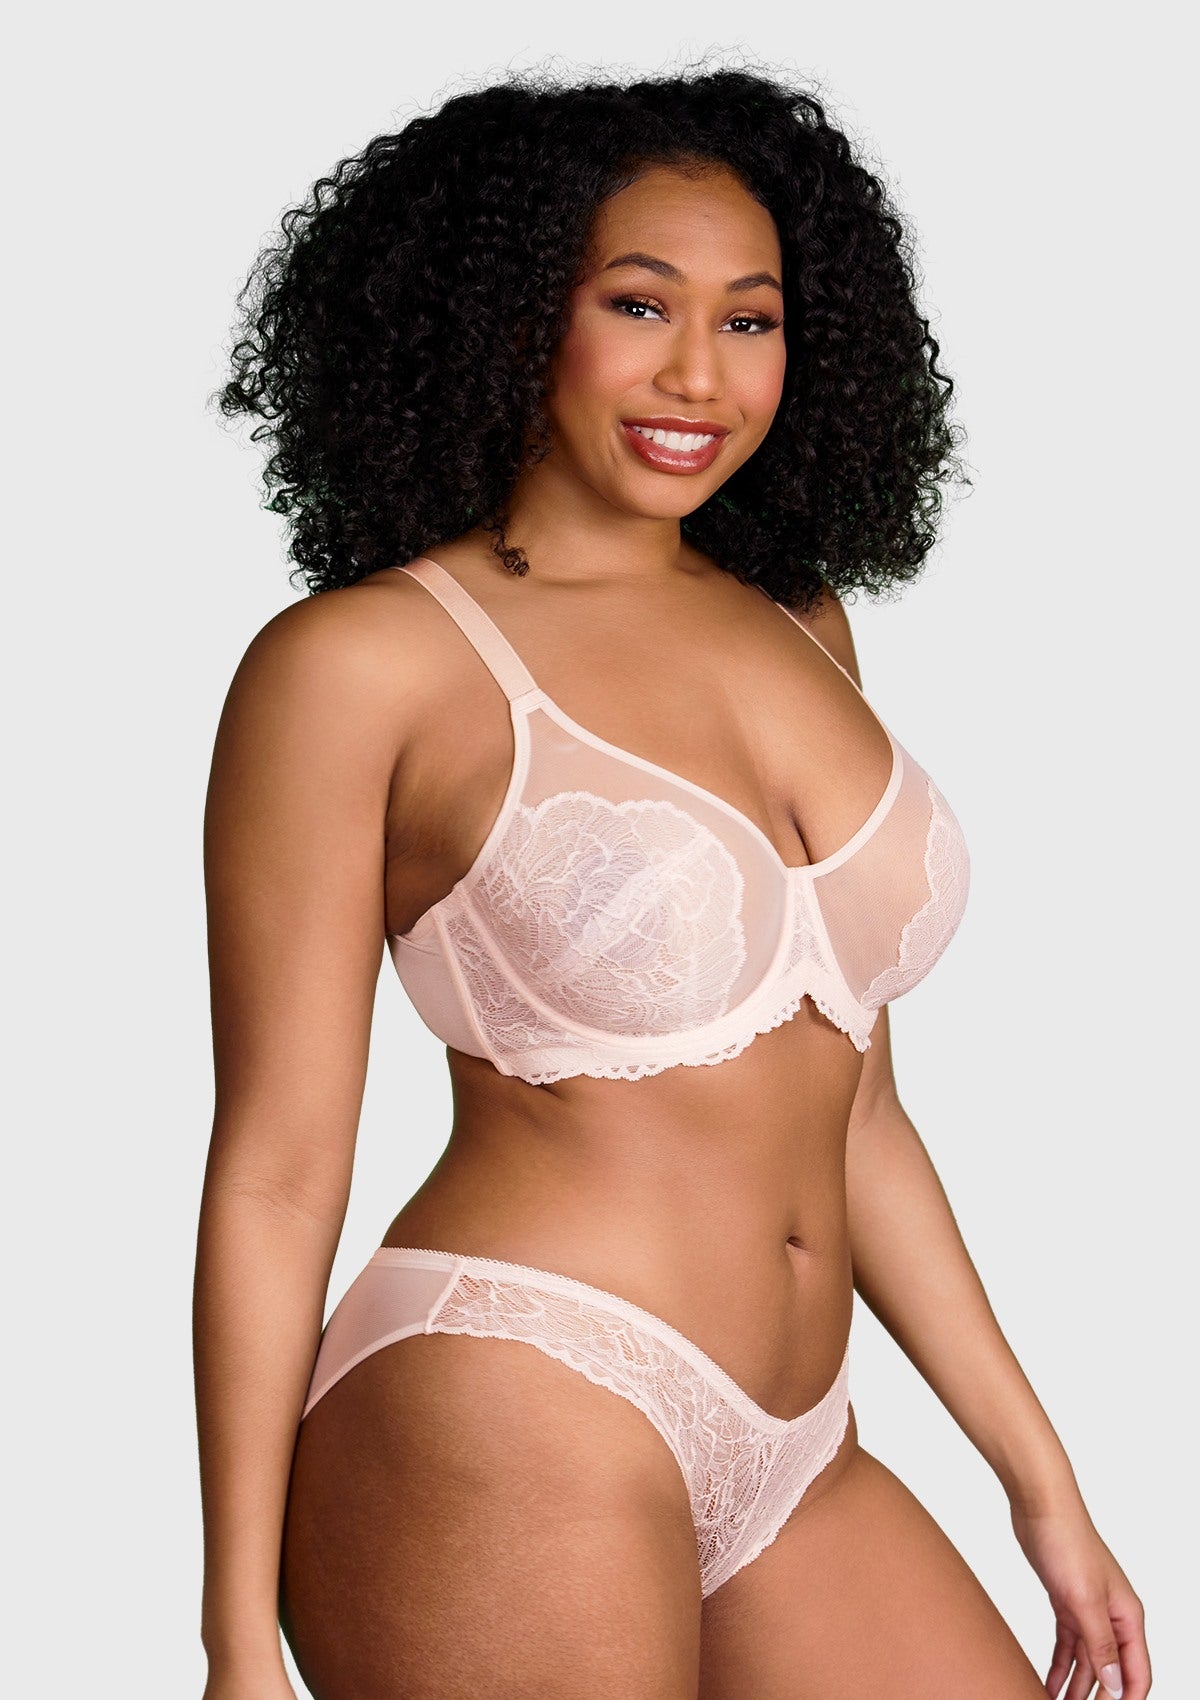 HSIA Blossom Sheer Lace Bra: Comfortable Underwire Bra For Big Busts - Dusty Peach / 38 / I